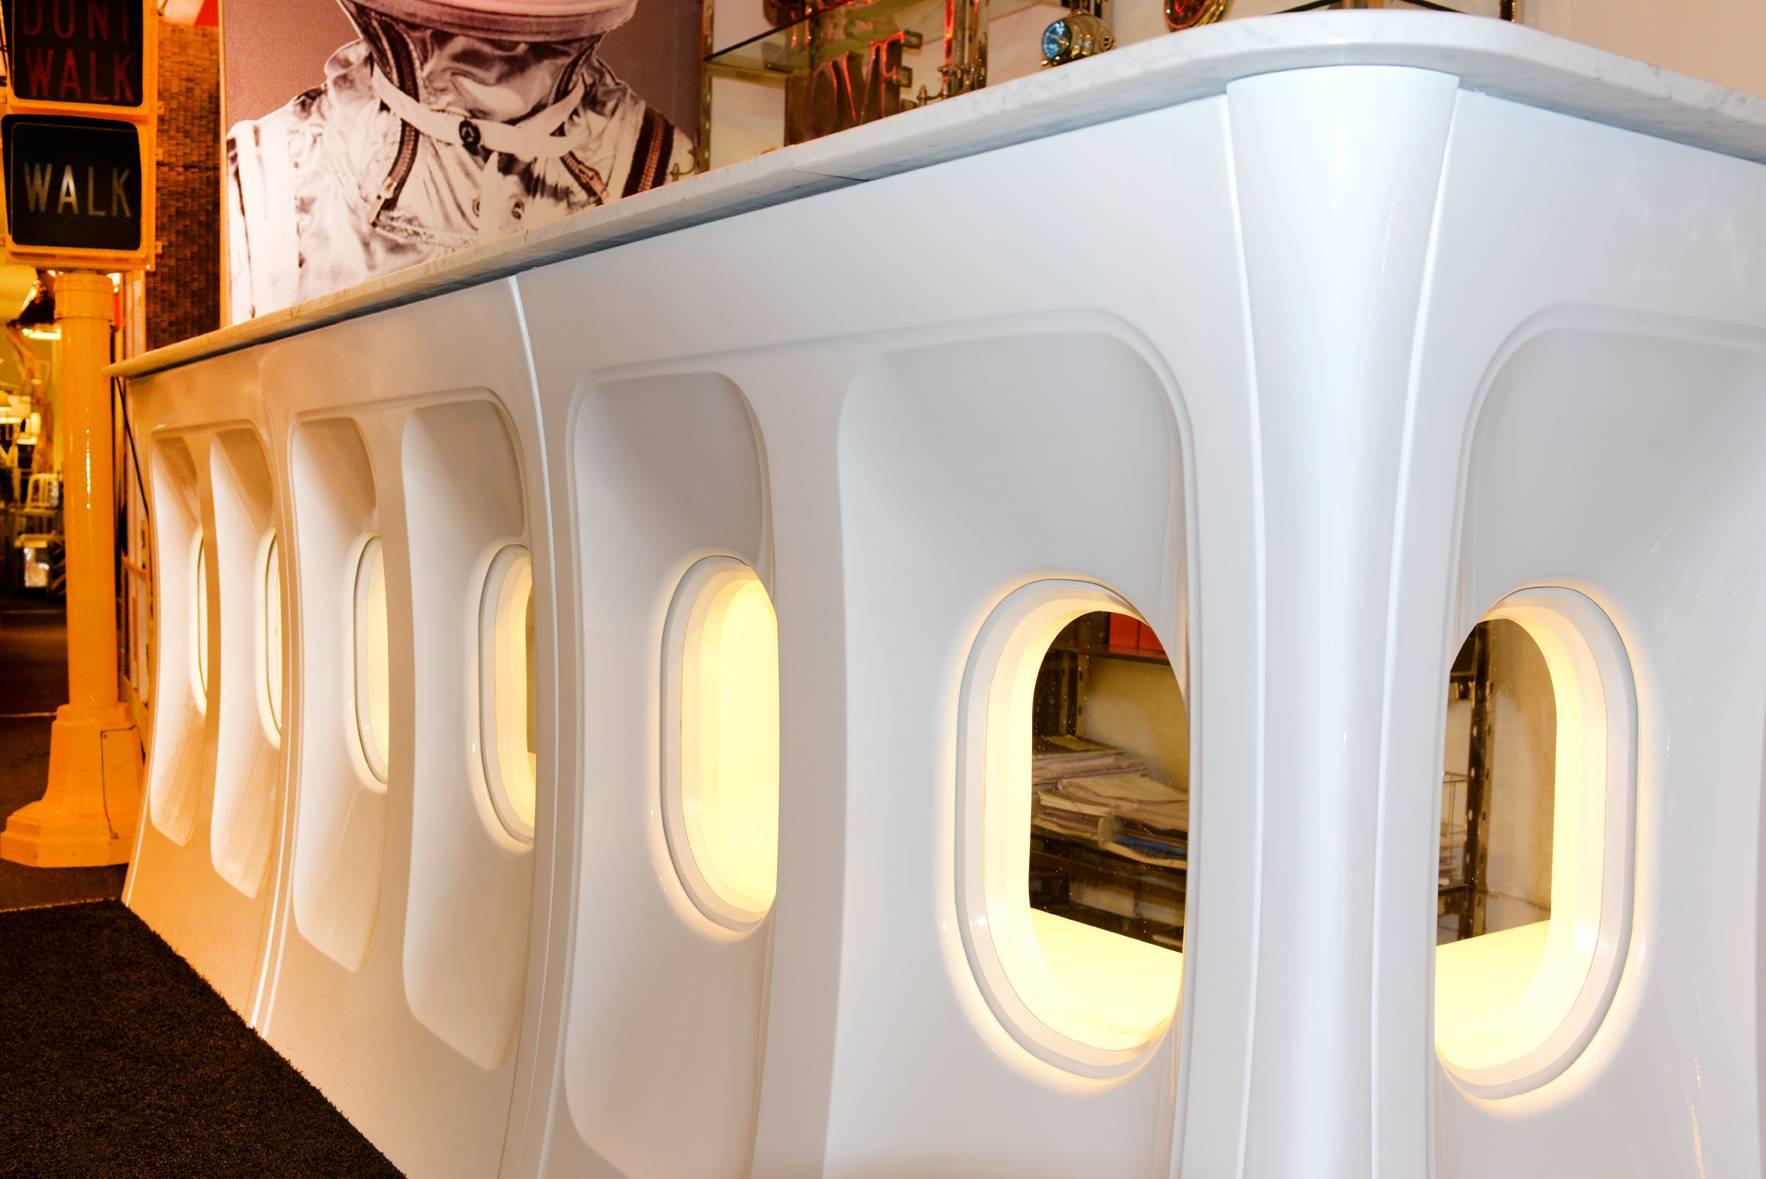 French Bar Fuselage Art Made with Portholes Airbus A340 Aircraft Fuselage 2016 For Sale